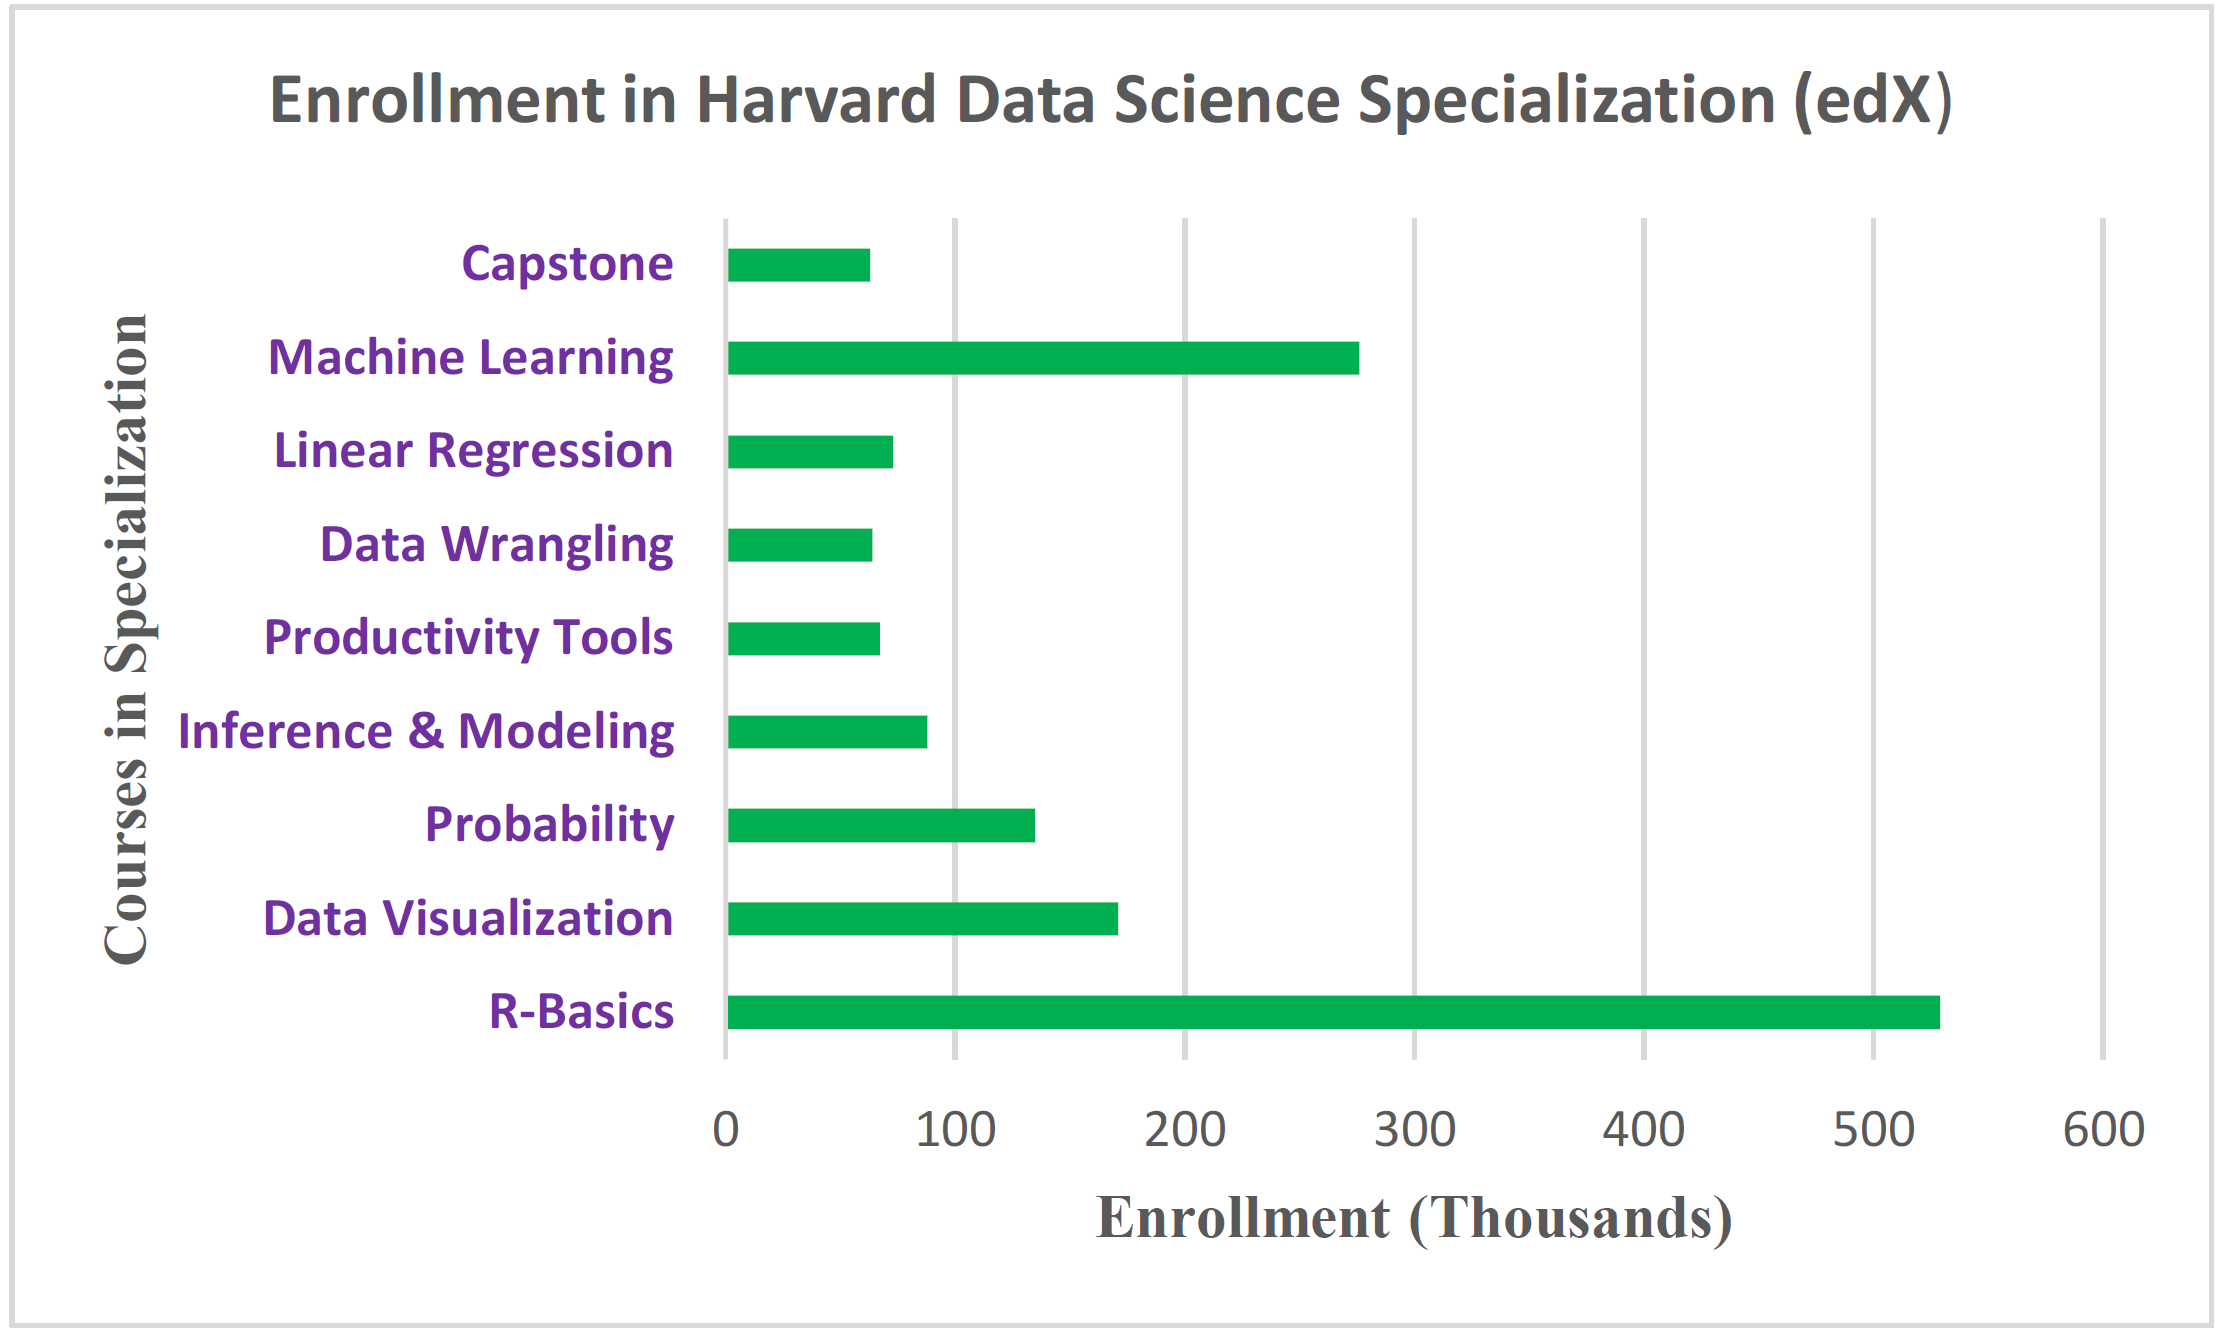 Completion Rate for MOOC Data Science Specializations is Very Low